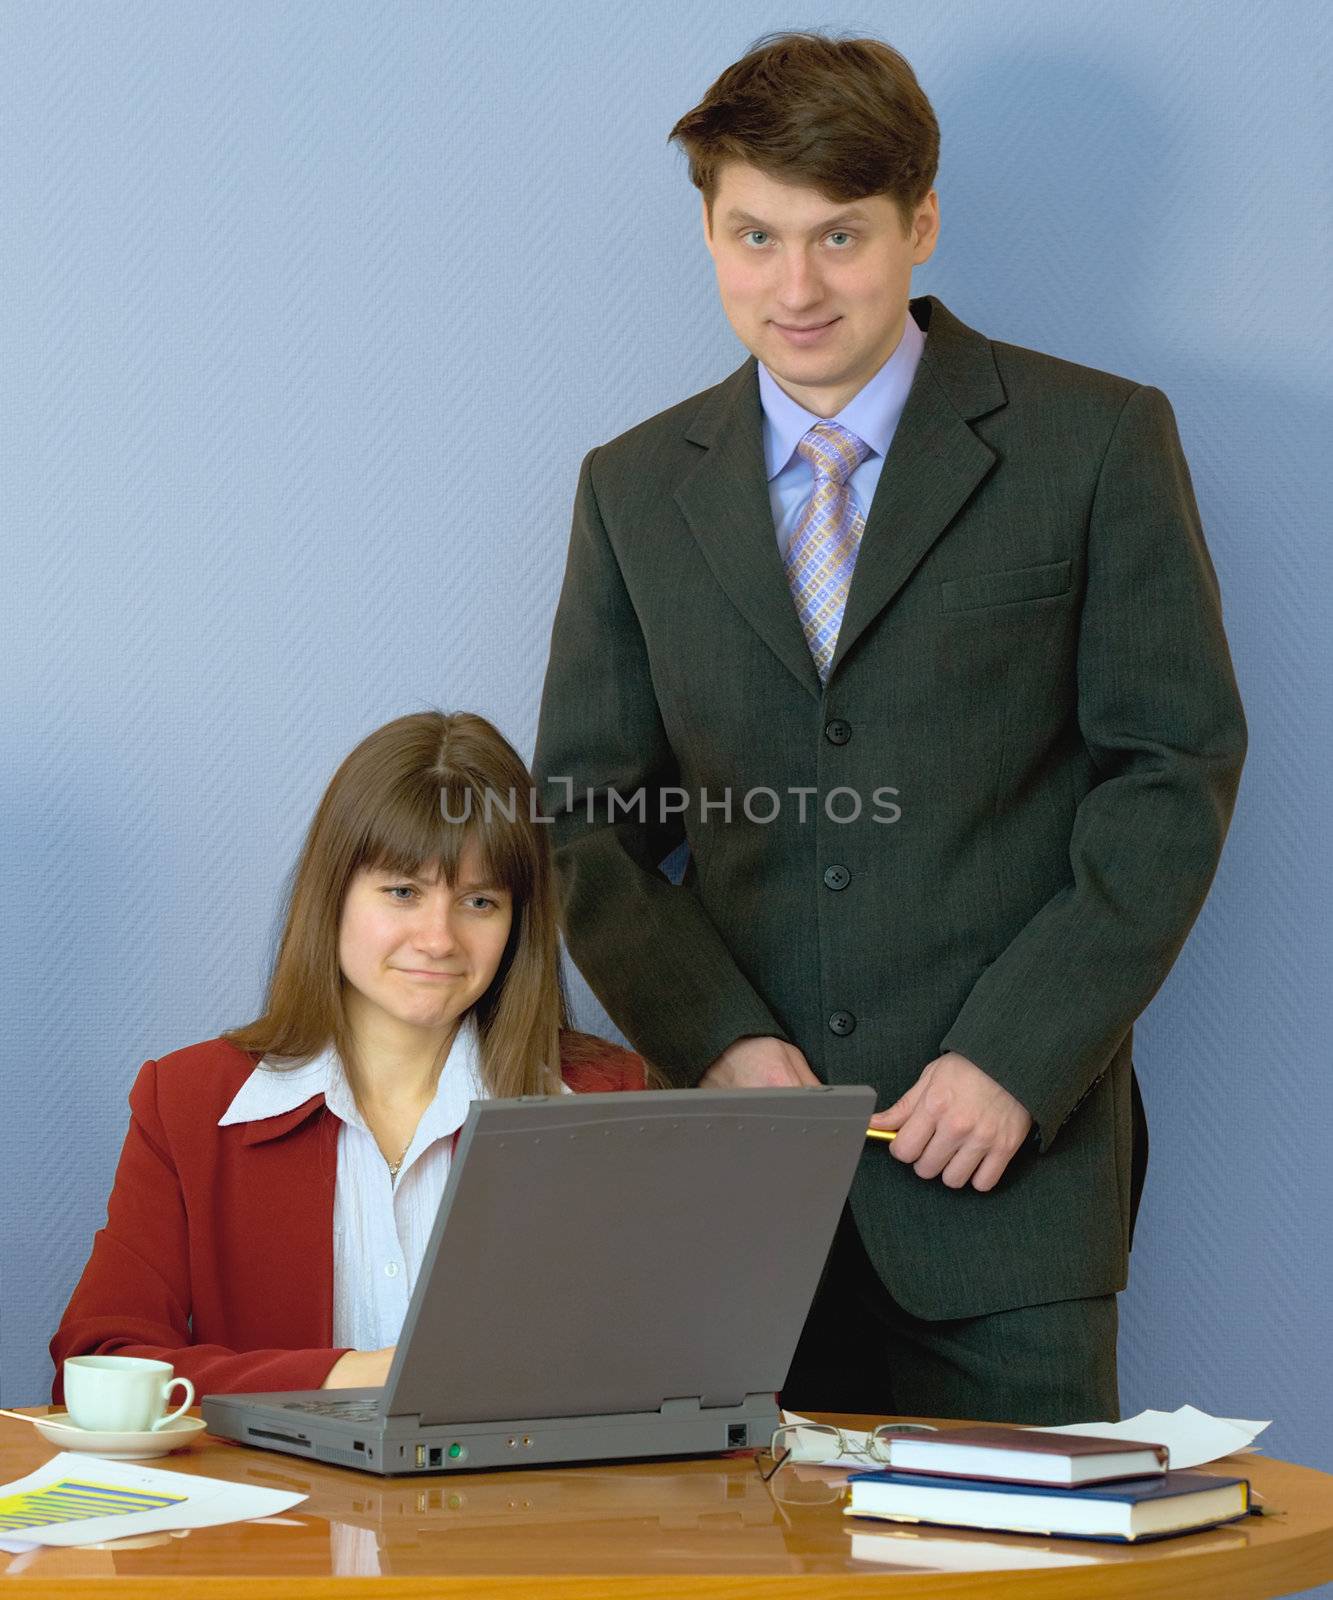 Girl sitting at a desktop and their chief